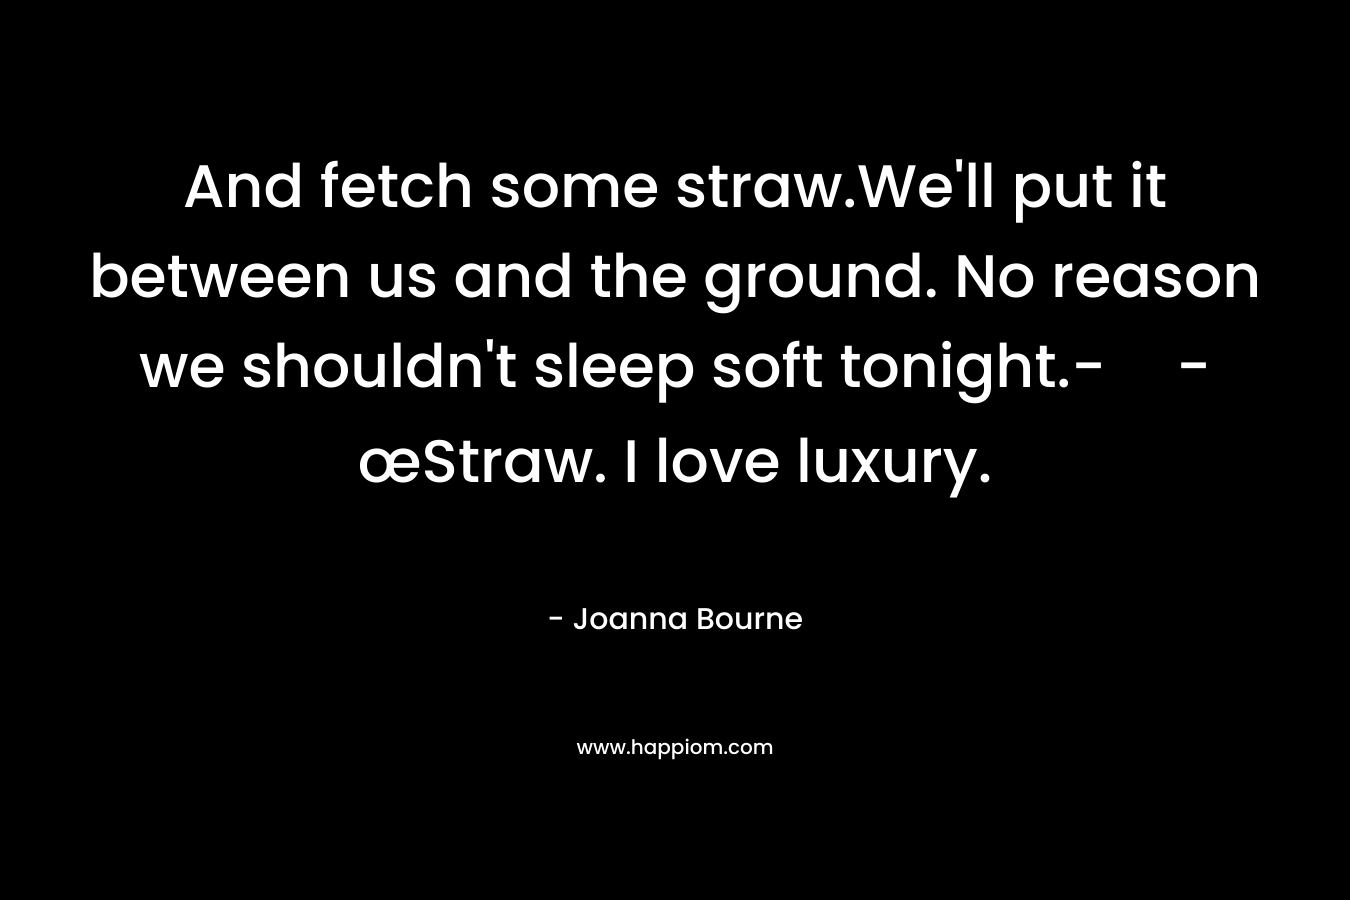 And fetch some straw.We’ll put it between us and the ground. No reason we shouldn’t sleep soft tonight.--œStraw. I love luxury. – Joanna Bourne